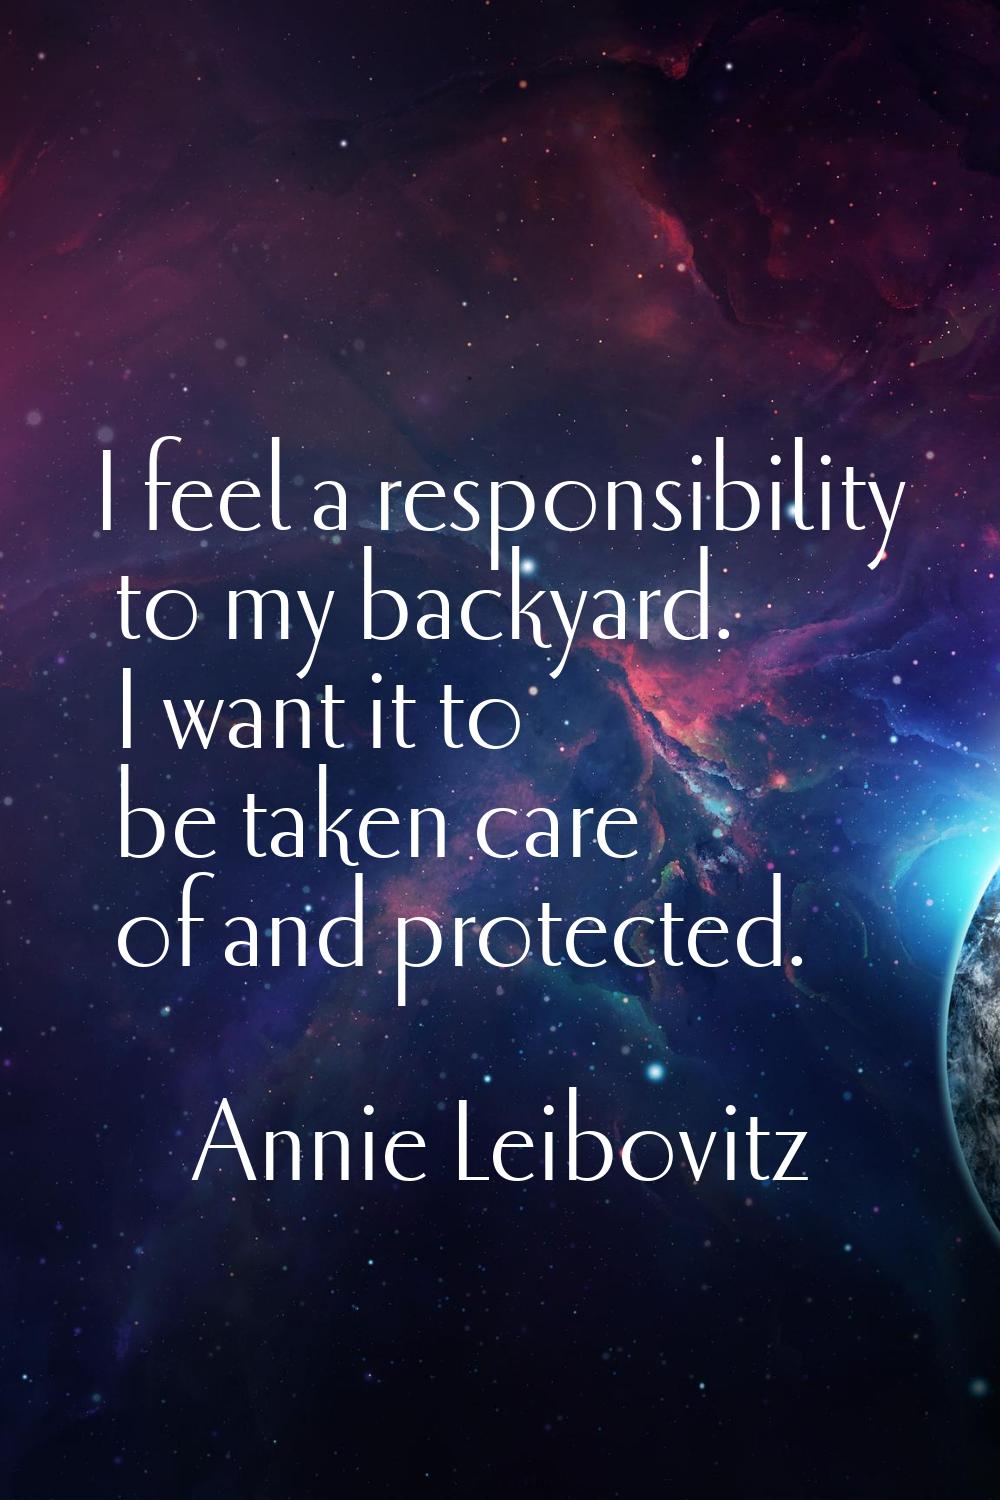 I feel a responsibility to my backyard. I want it to be taken care of and protected.